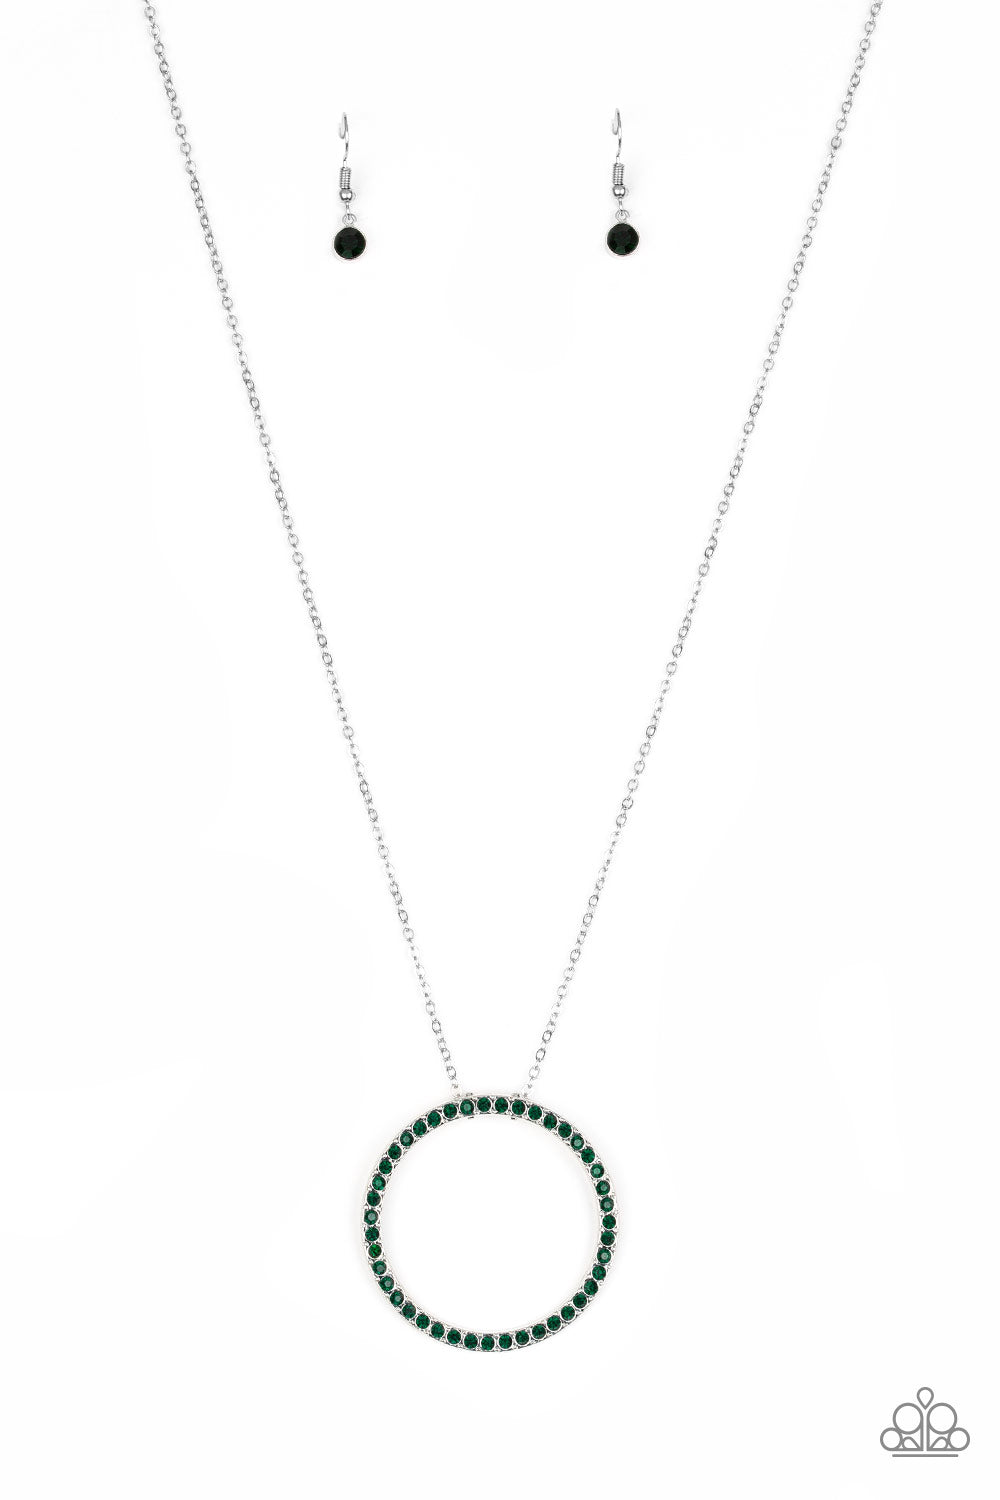 Paparazzi Accessories - Center Of Attention - Green Long Necklace